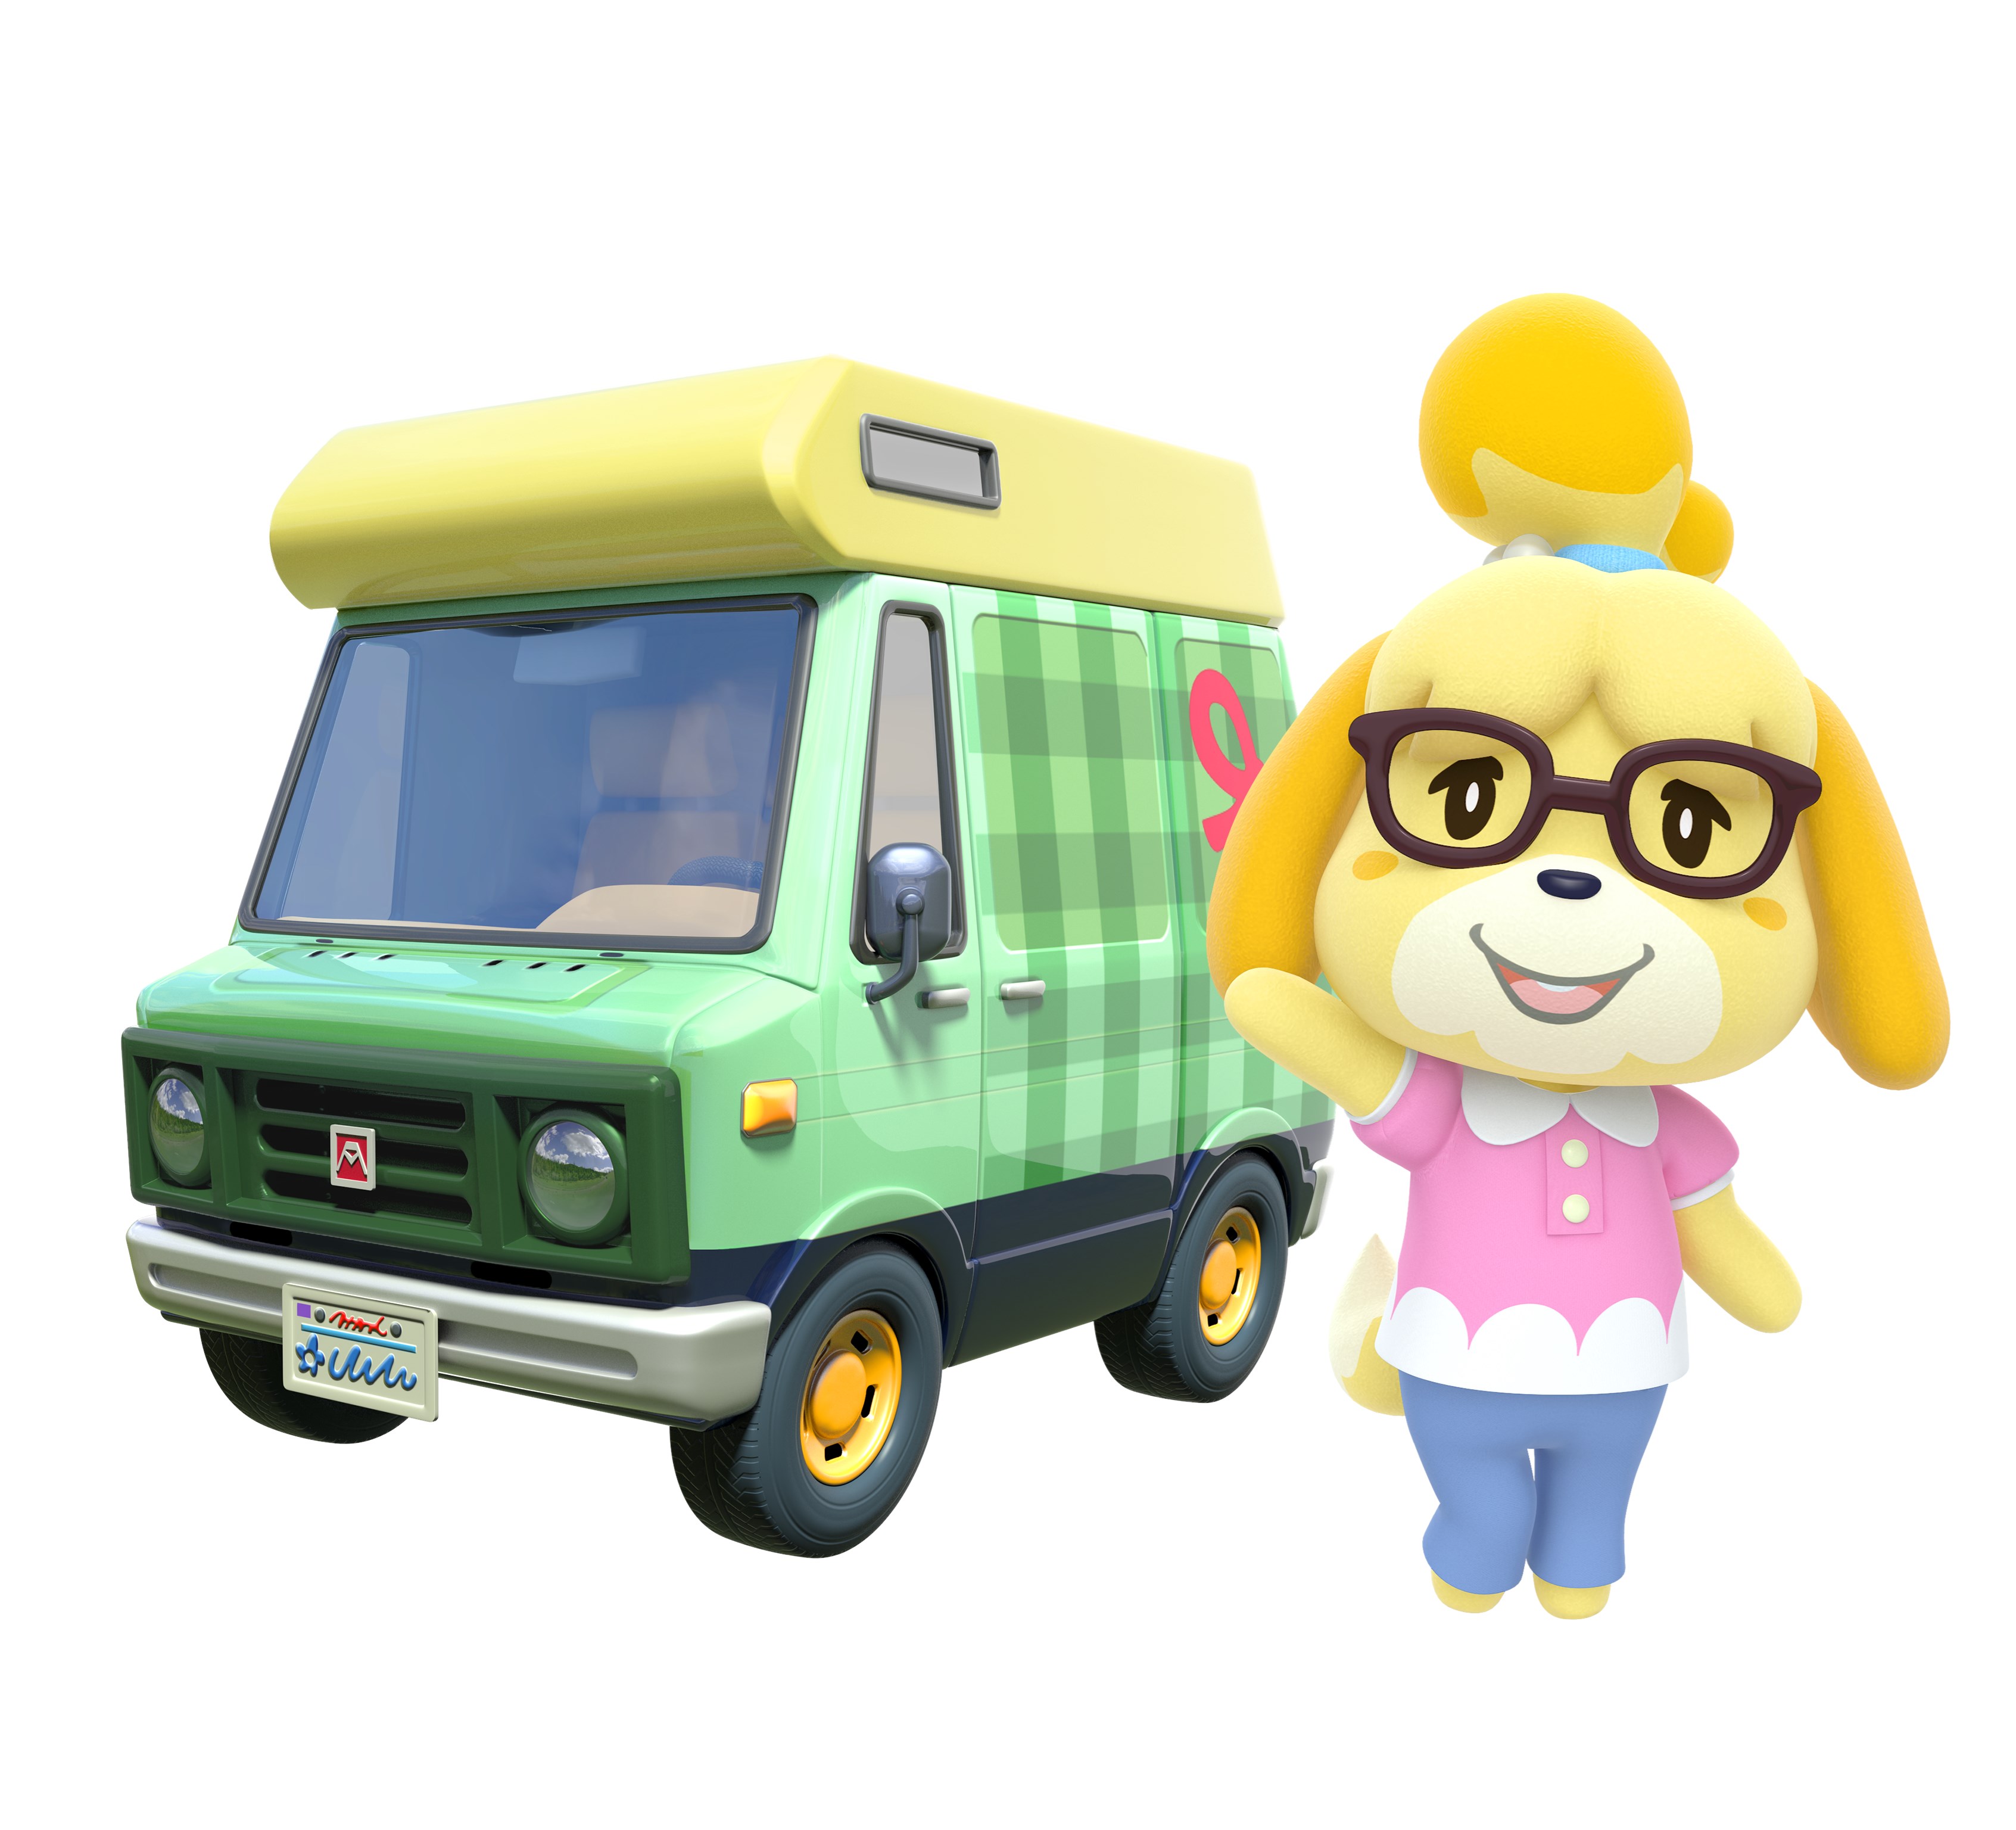 3DS_ACNL-Welcomeamiibo_RV-char_02_png_jpgcopy